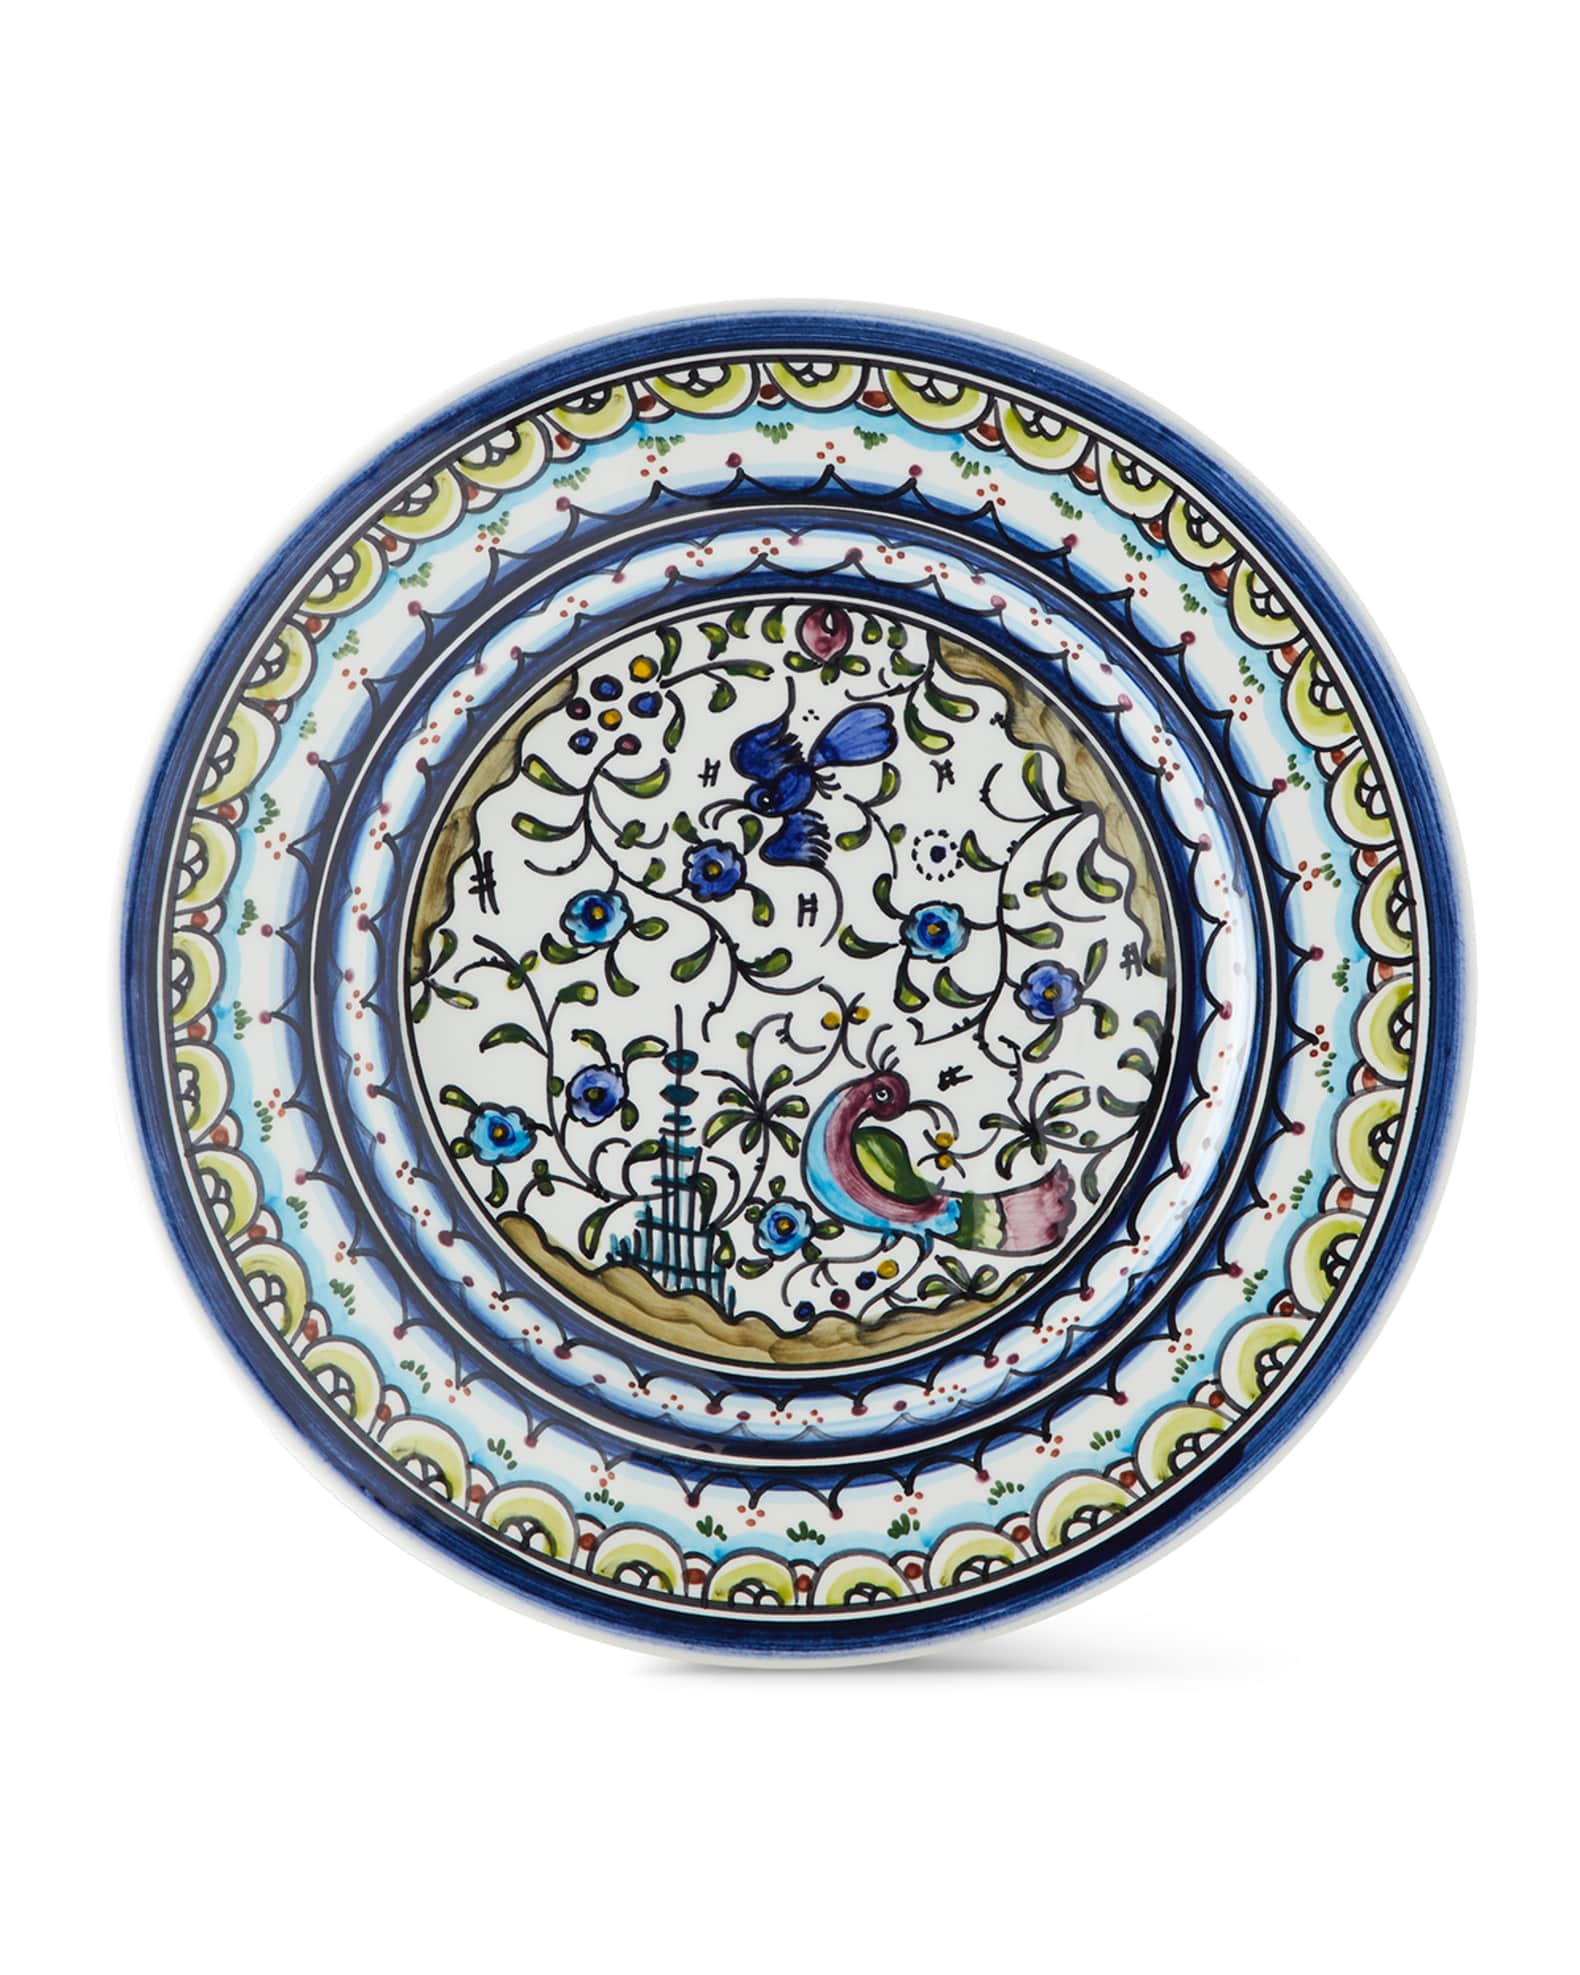 Neiman Marcus Pavoes Blue and Green Salad Plates, Set of 4